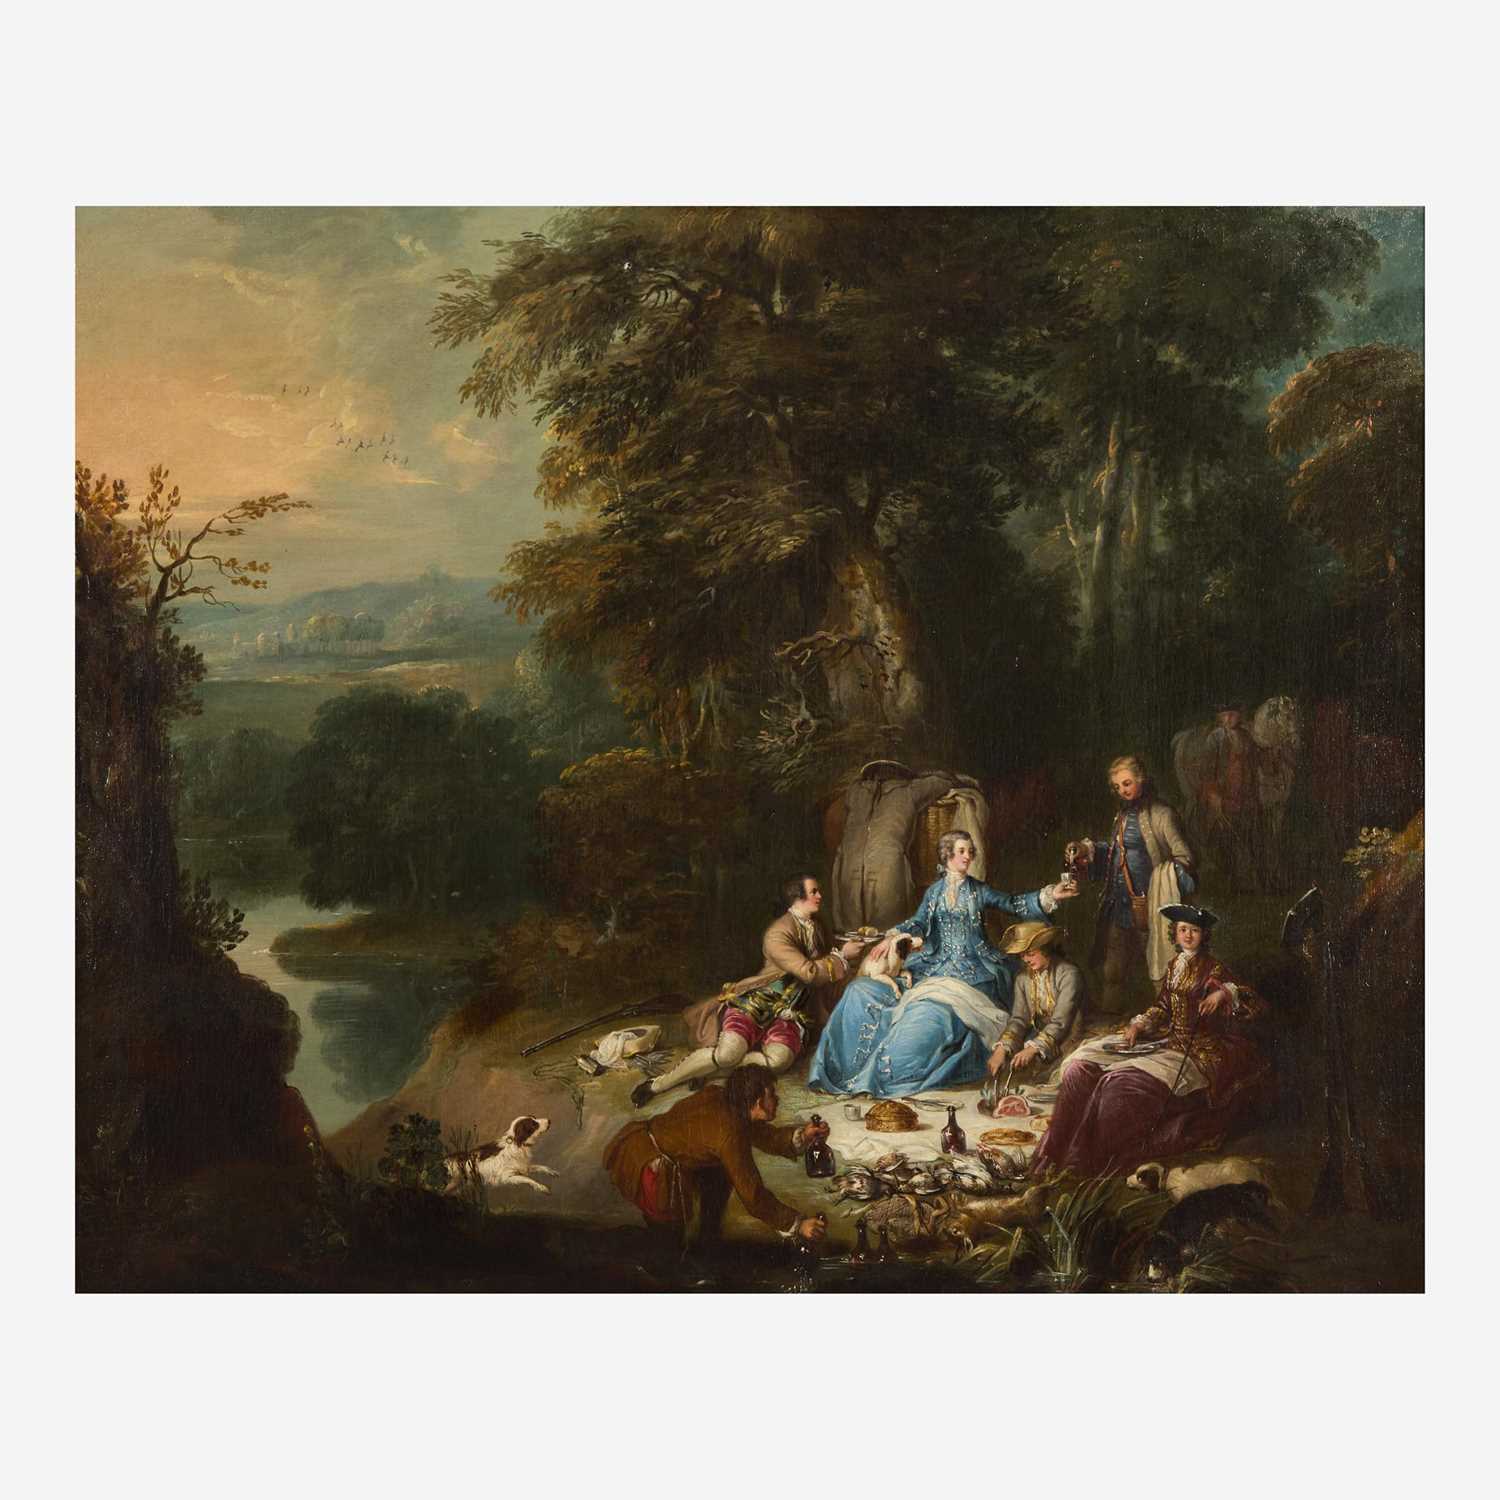 Lot 23 - Attributed to Bonaventure de Bar (French, 1700–1729)